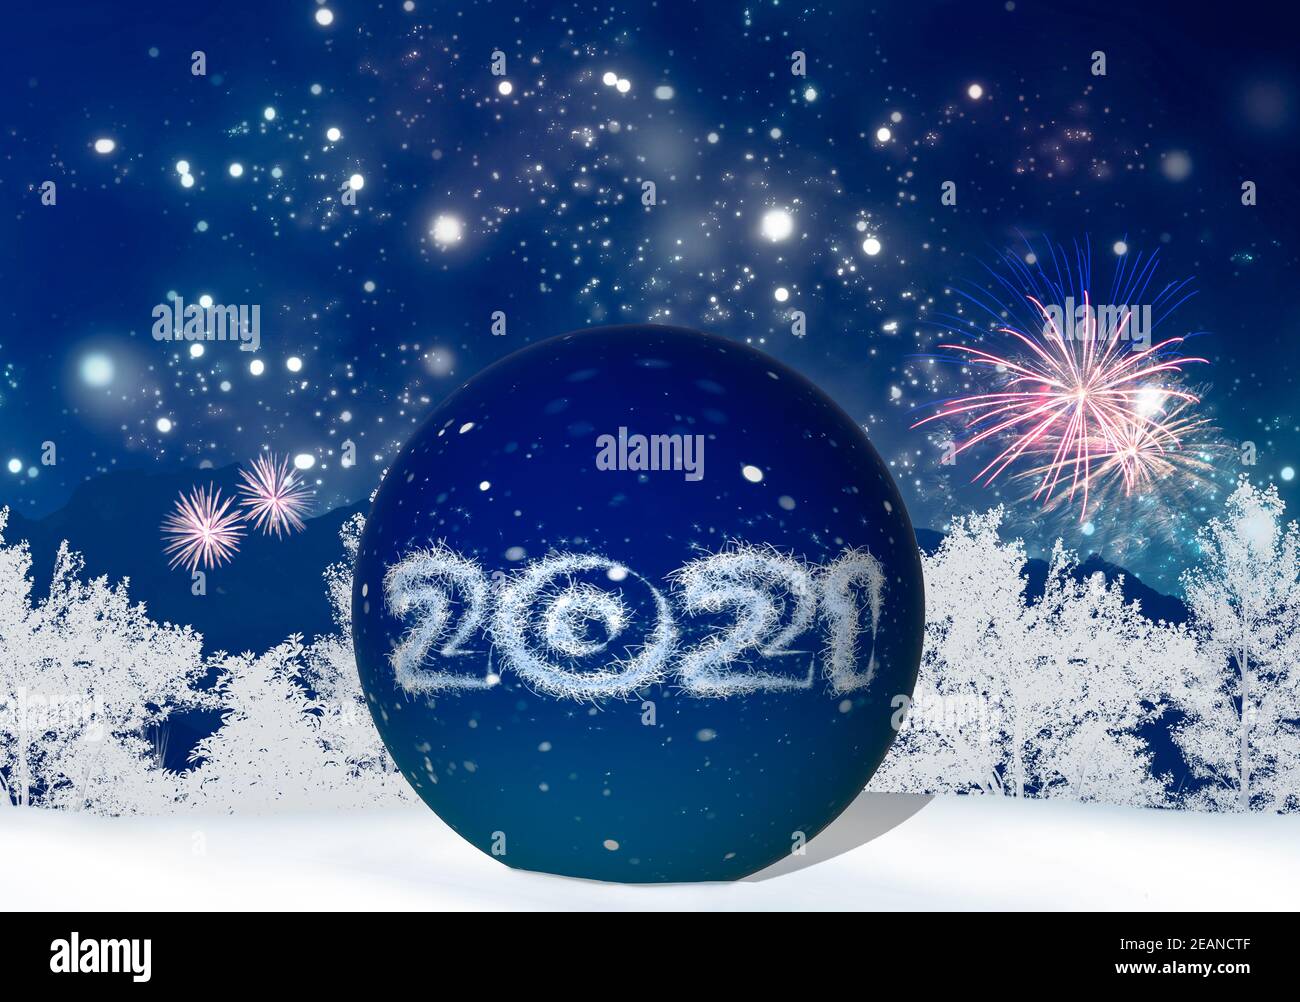 New Year's Eve illustration with year 2021 and fireworks on a wintery background Stock Photo